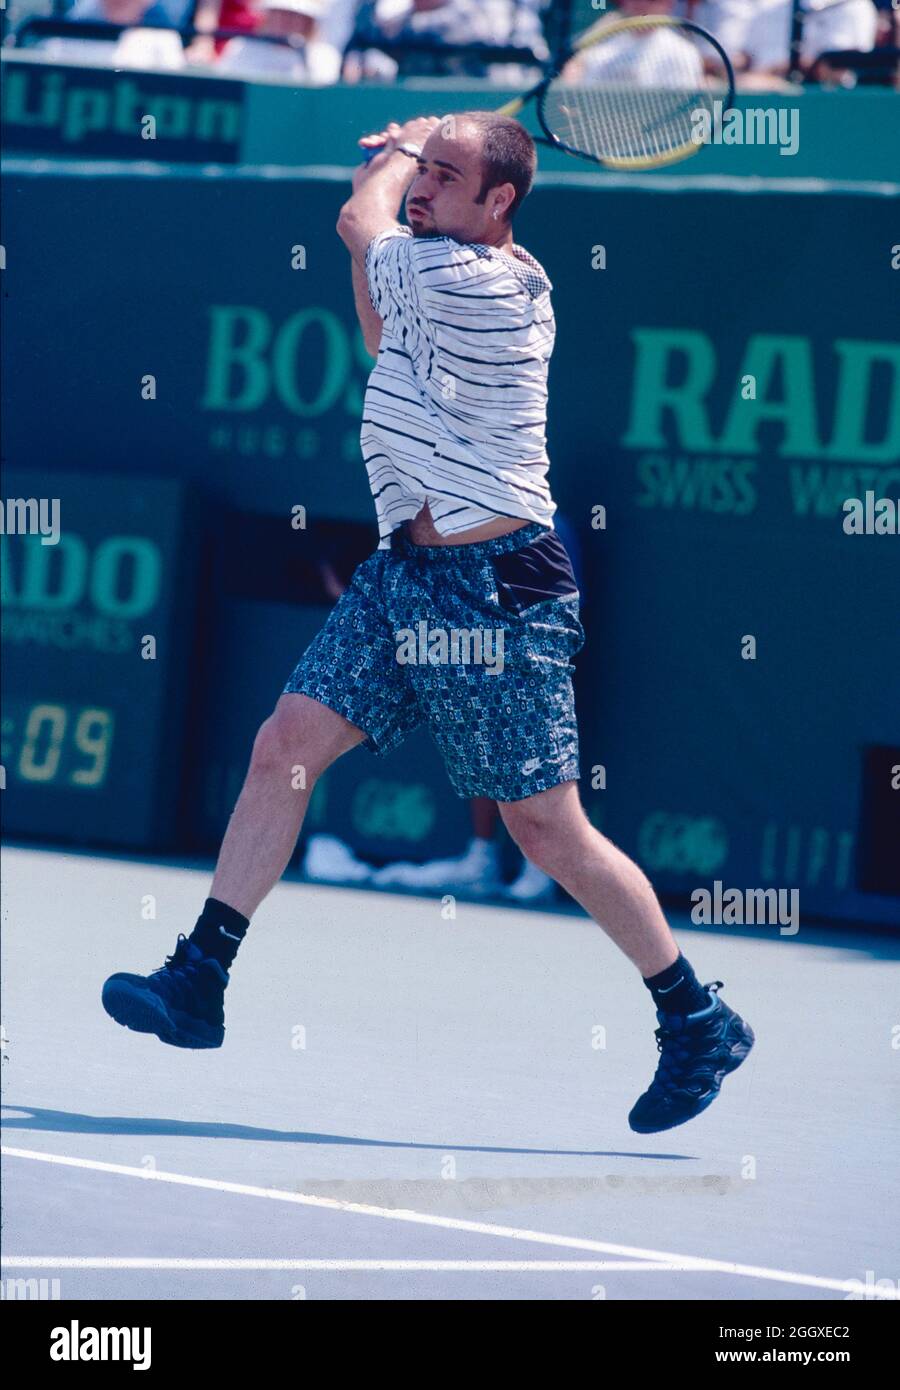 American tennis player Andre Agassi, 1990s Stock Photo